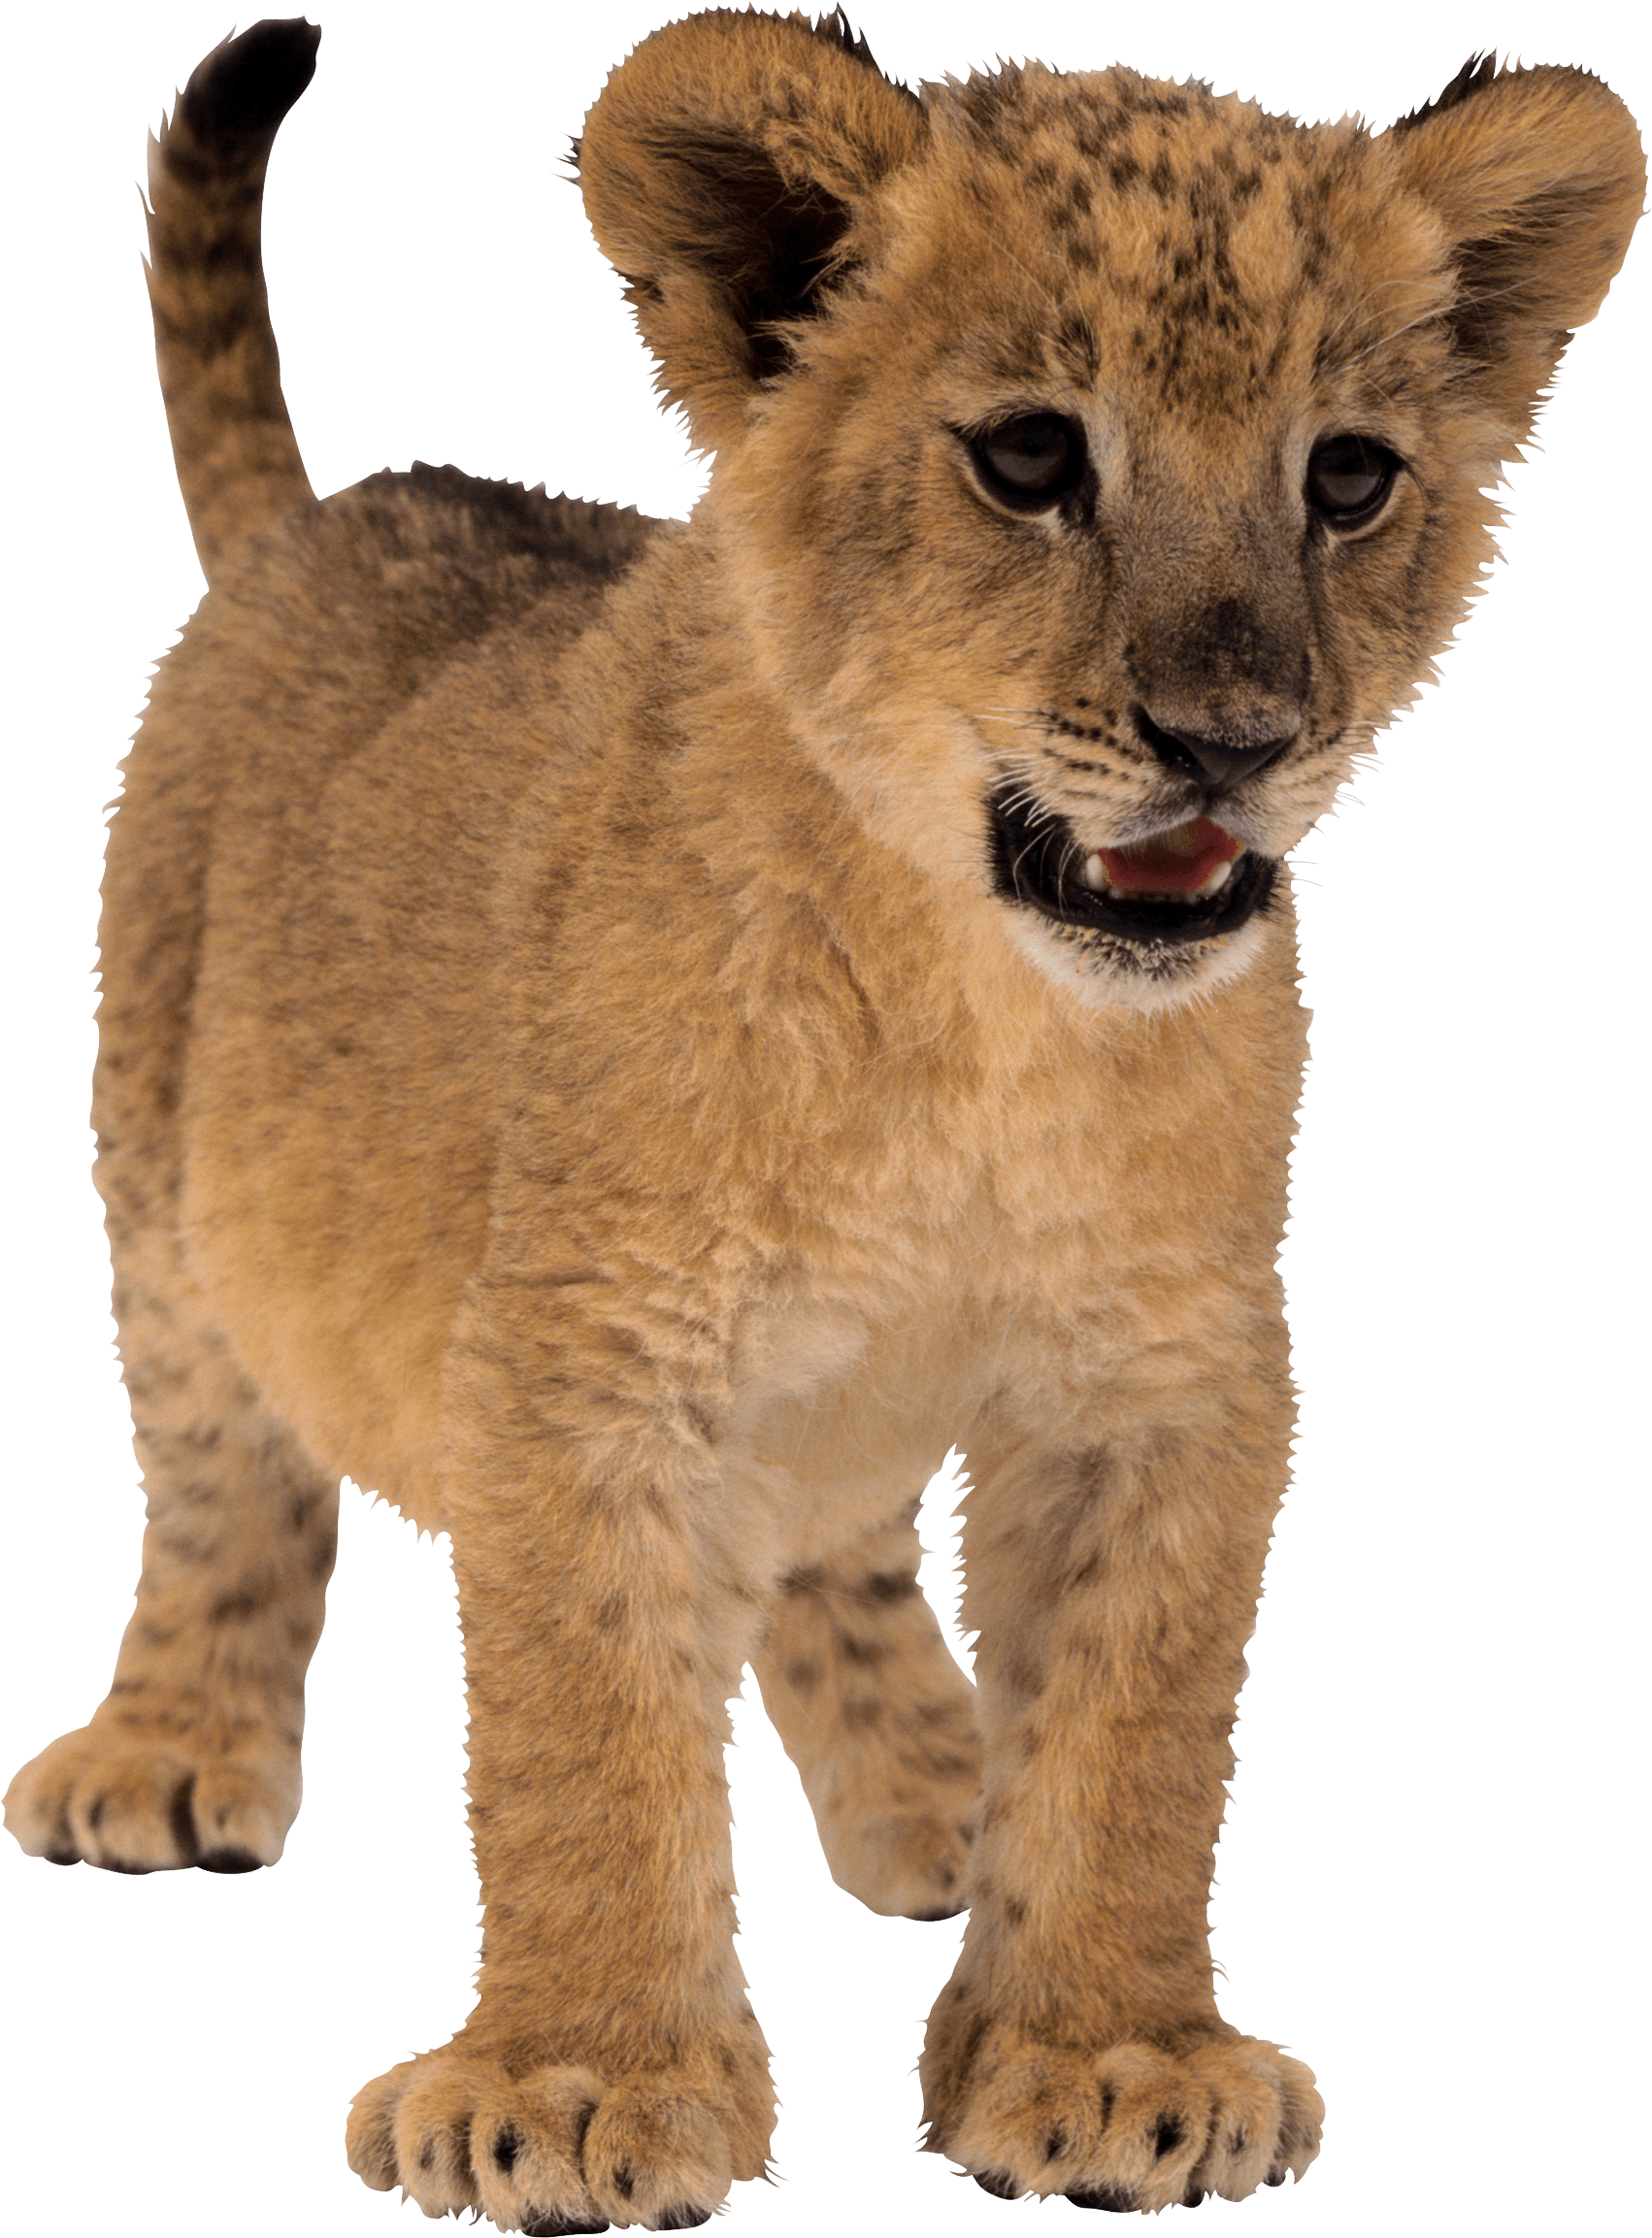 download small lion png image png image pngimg #11308